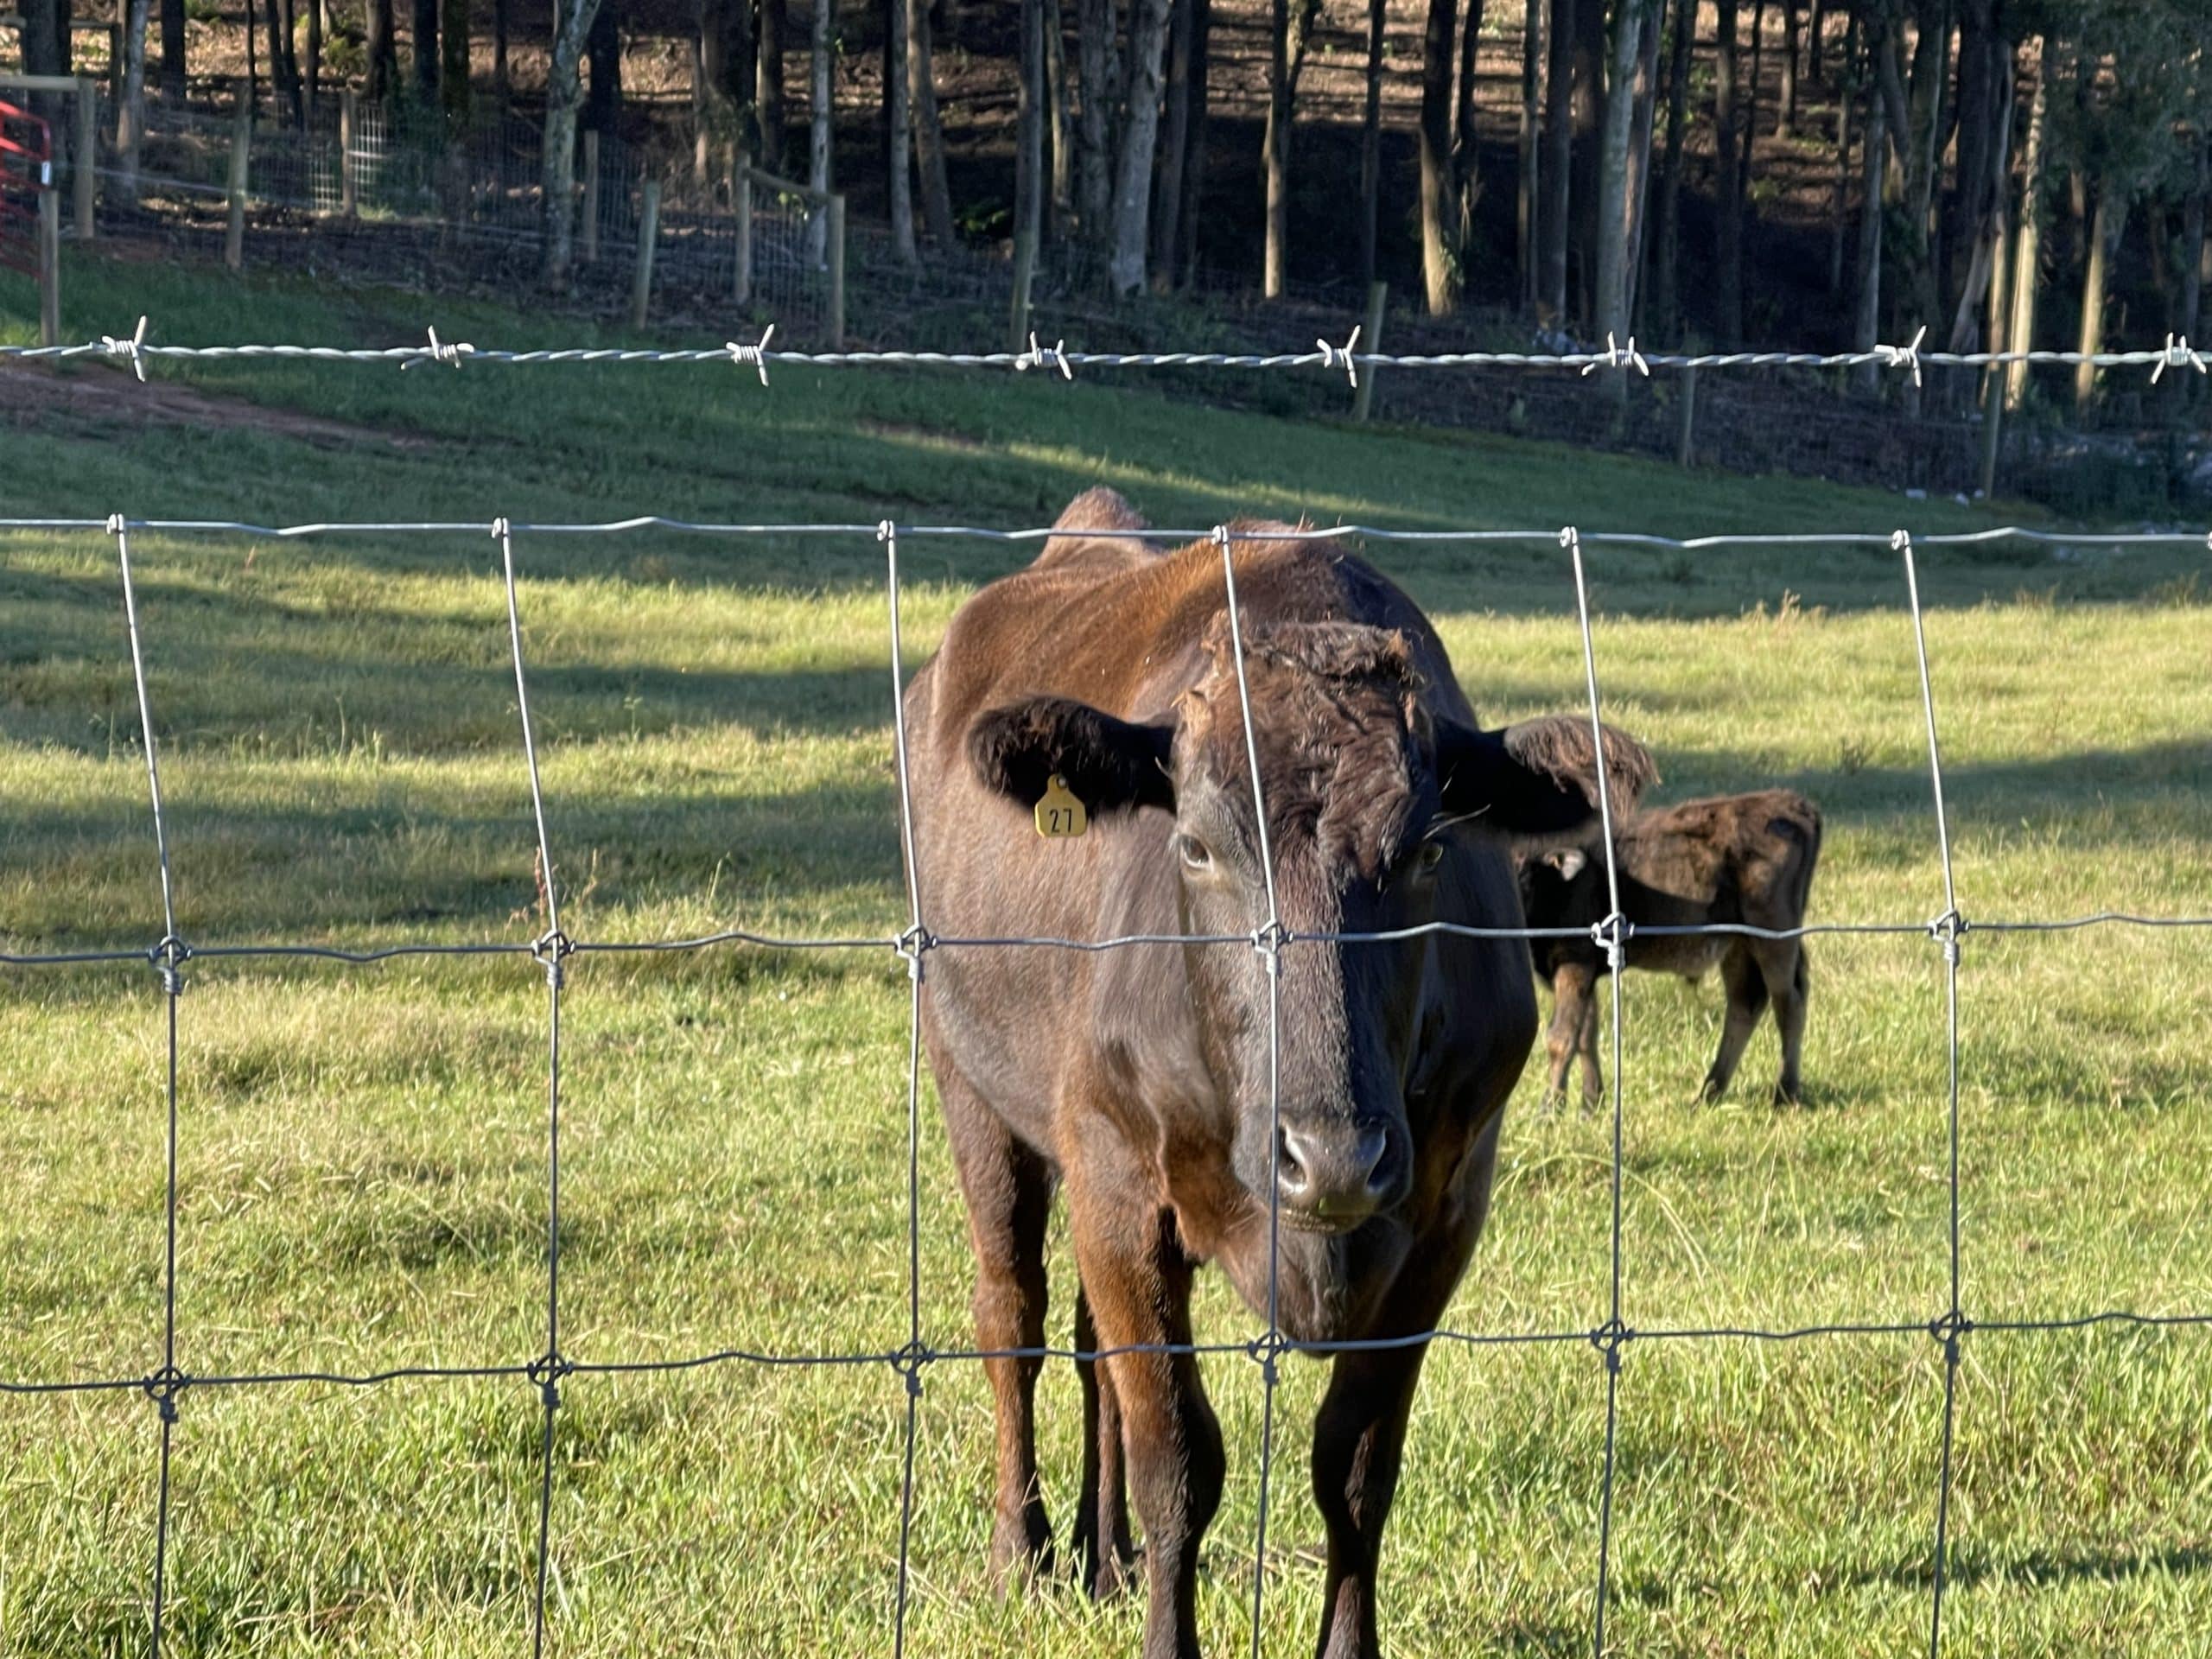 A cow peers at the camera through a galvanized wire fence.